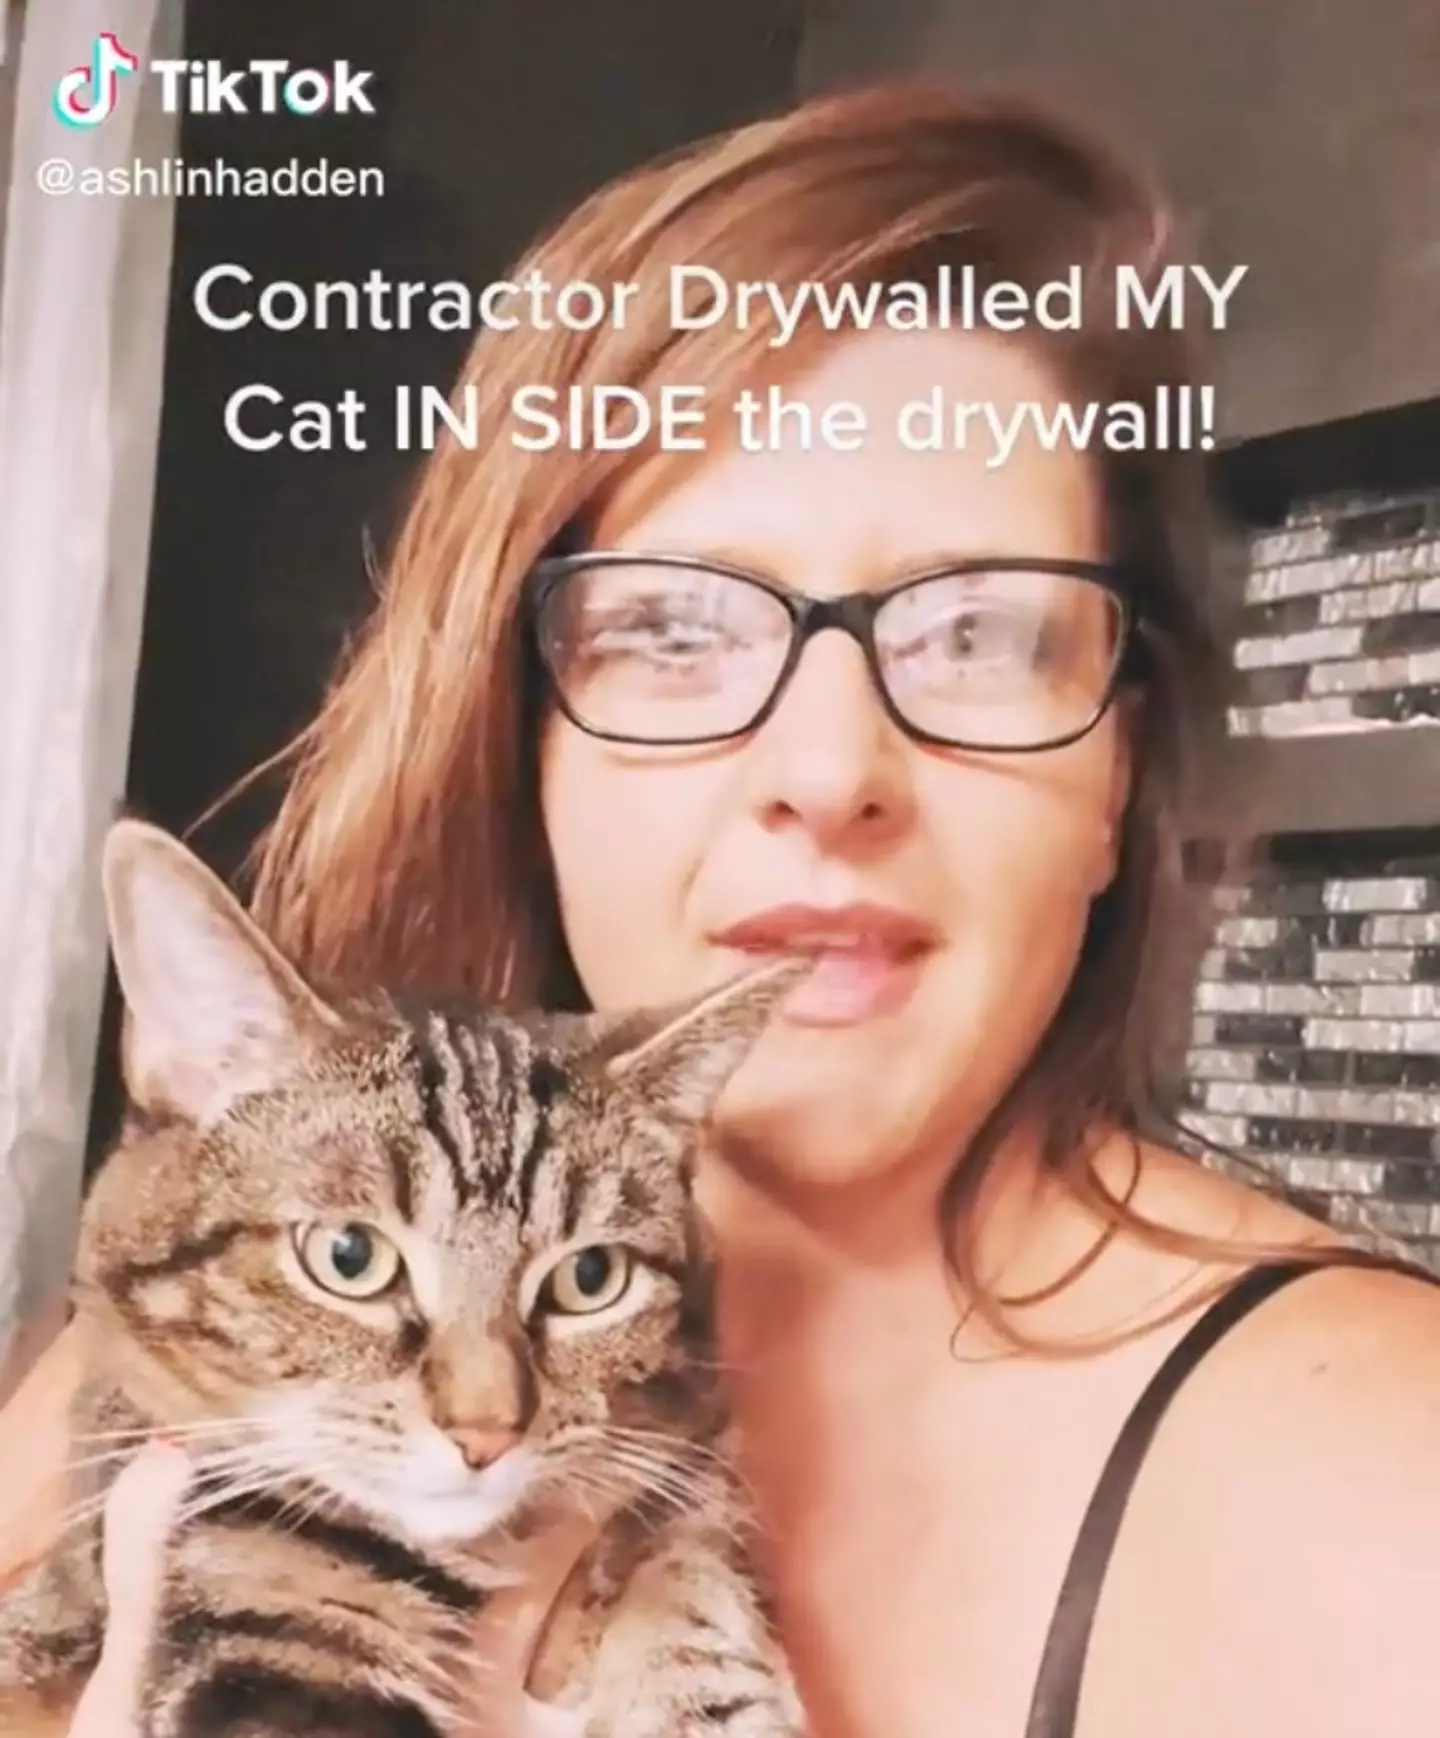 One woman’s cat decided to explore inside a wall - and ended up getting plastered inside it.